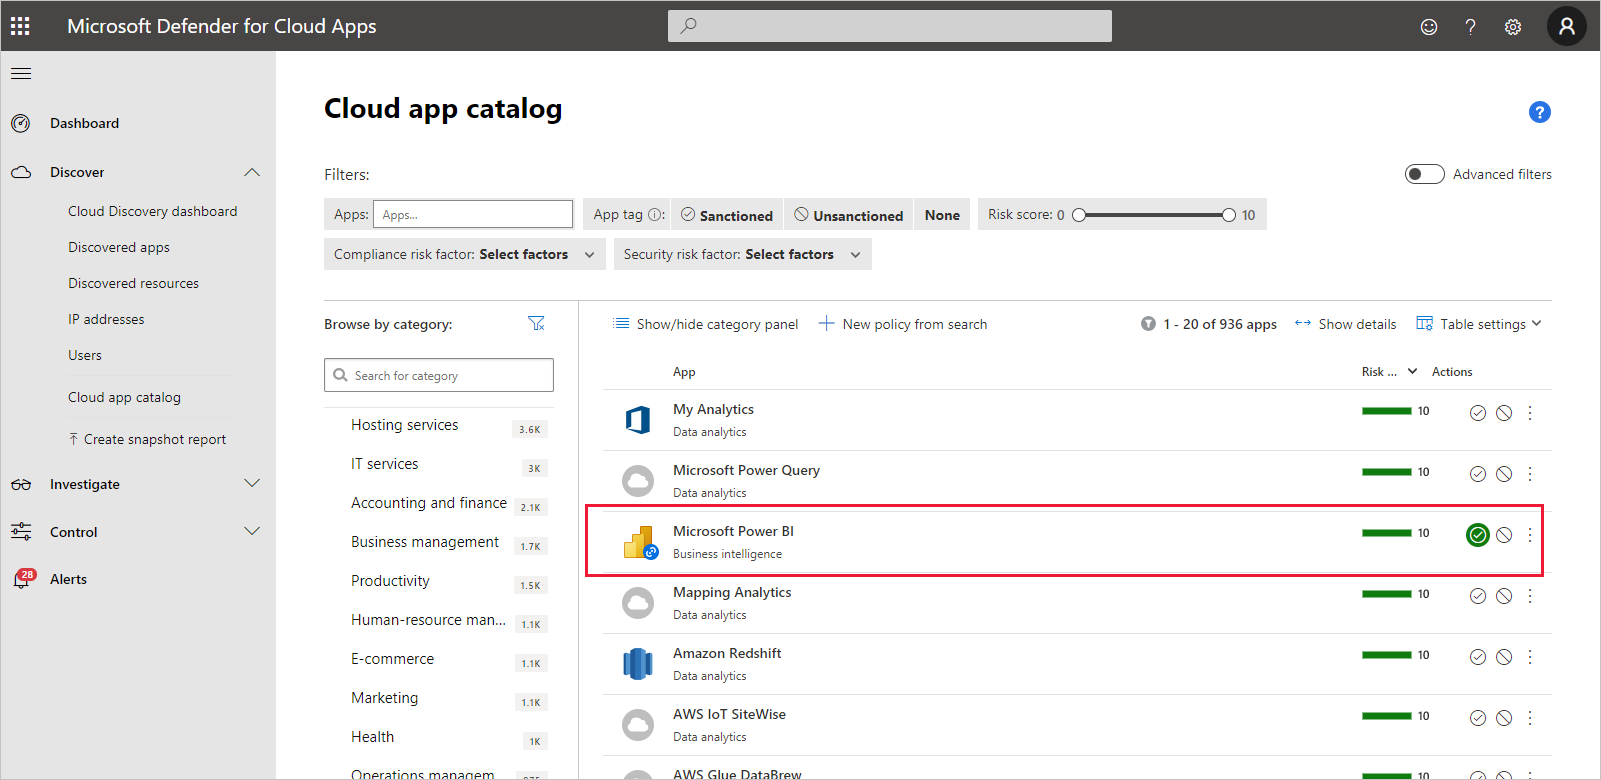 Screenshot of the Defender for Cloud Apps window showing the Cloud app catalog page with Power BI highlighted.